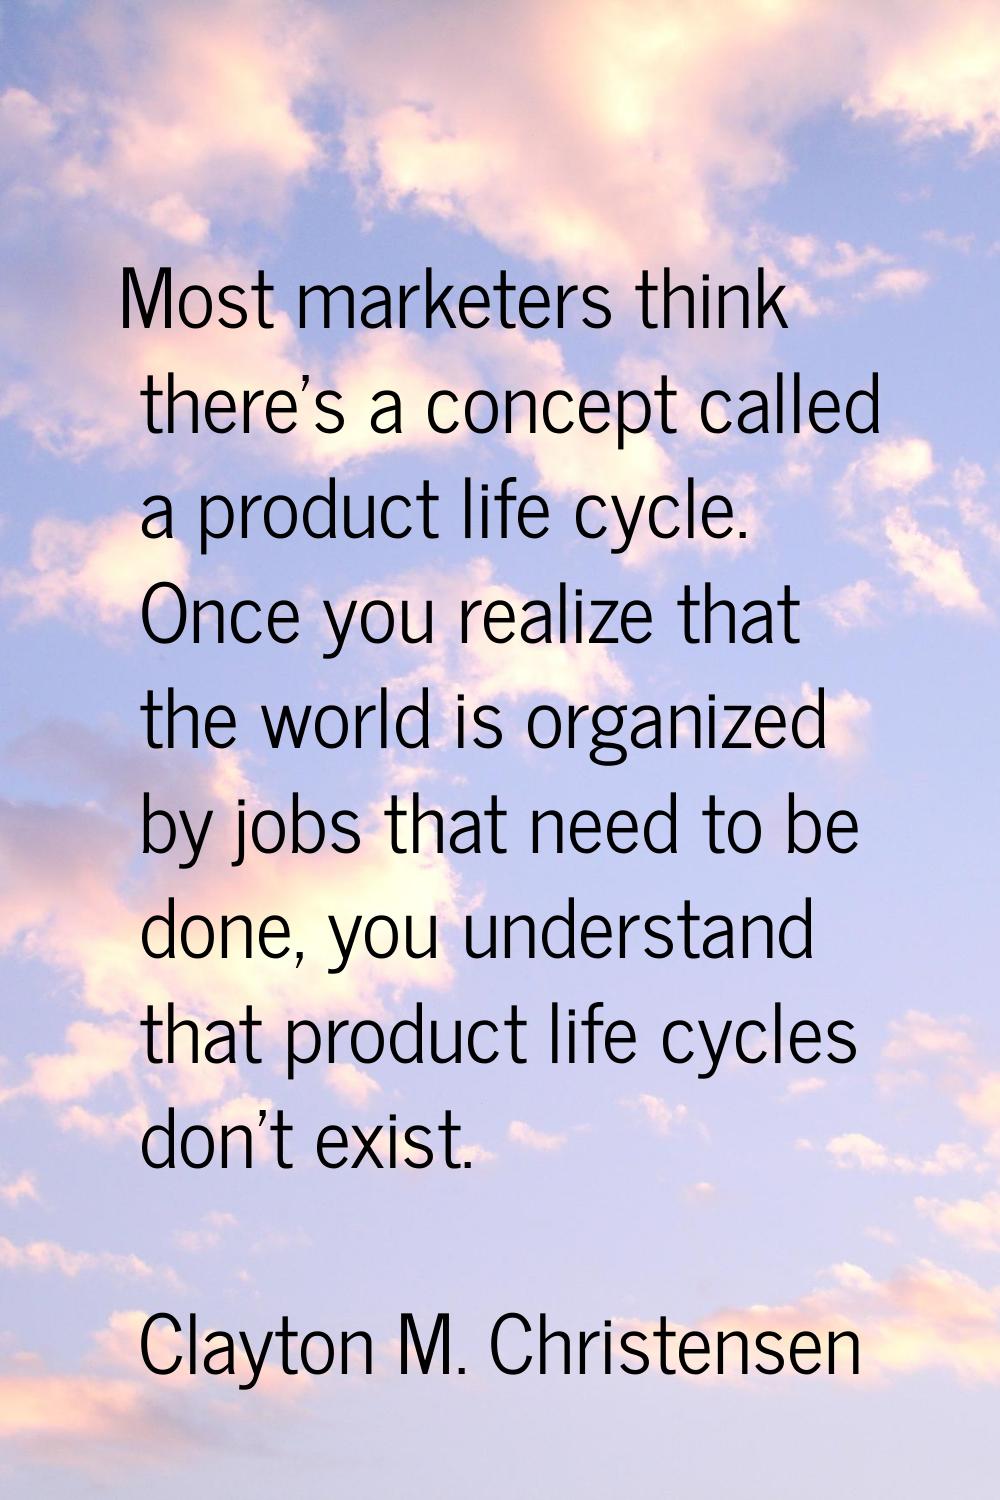 Most marketers think there's a concept called a product life cycle. Once you realize that the world